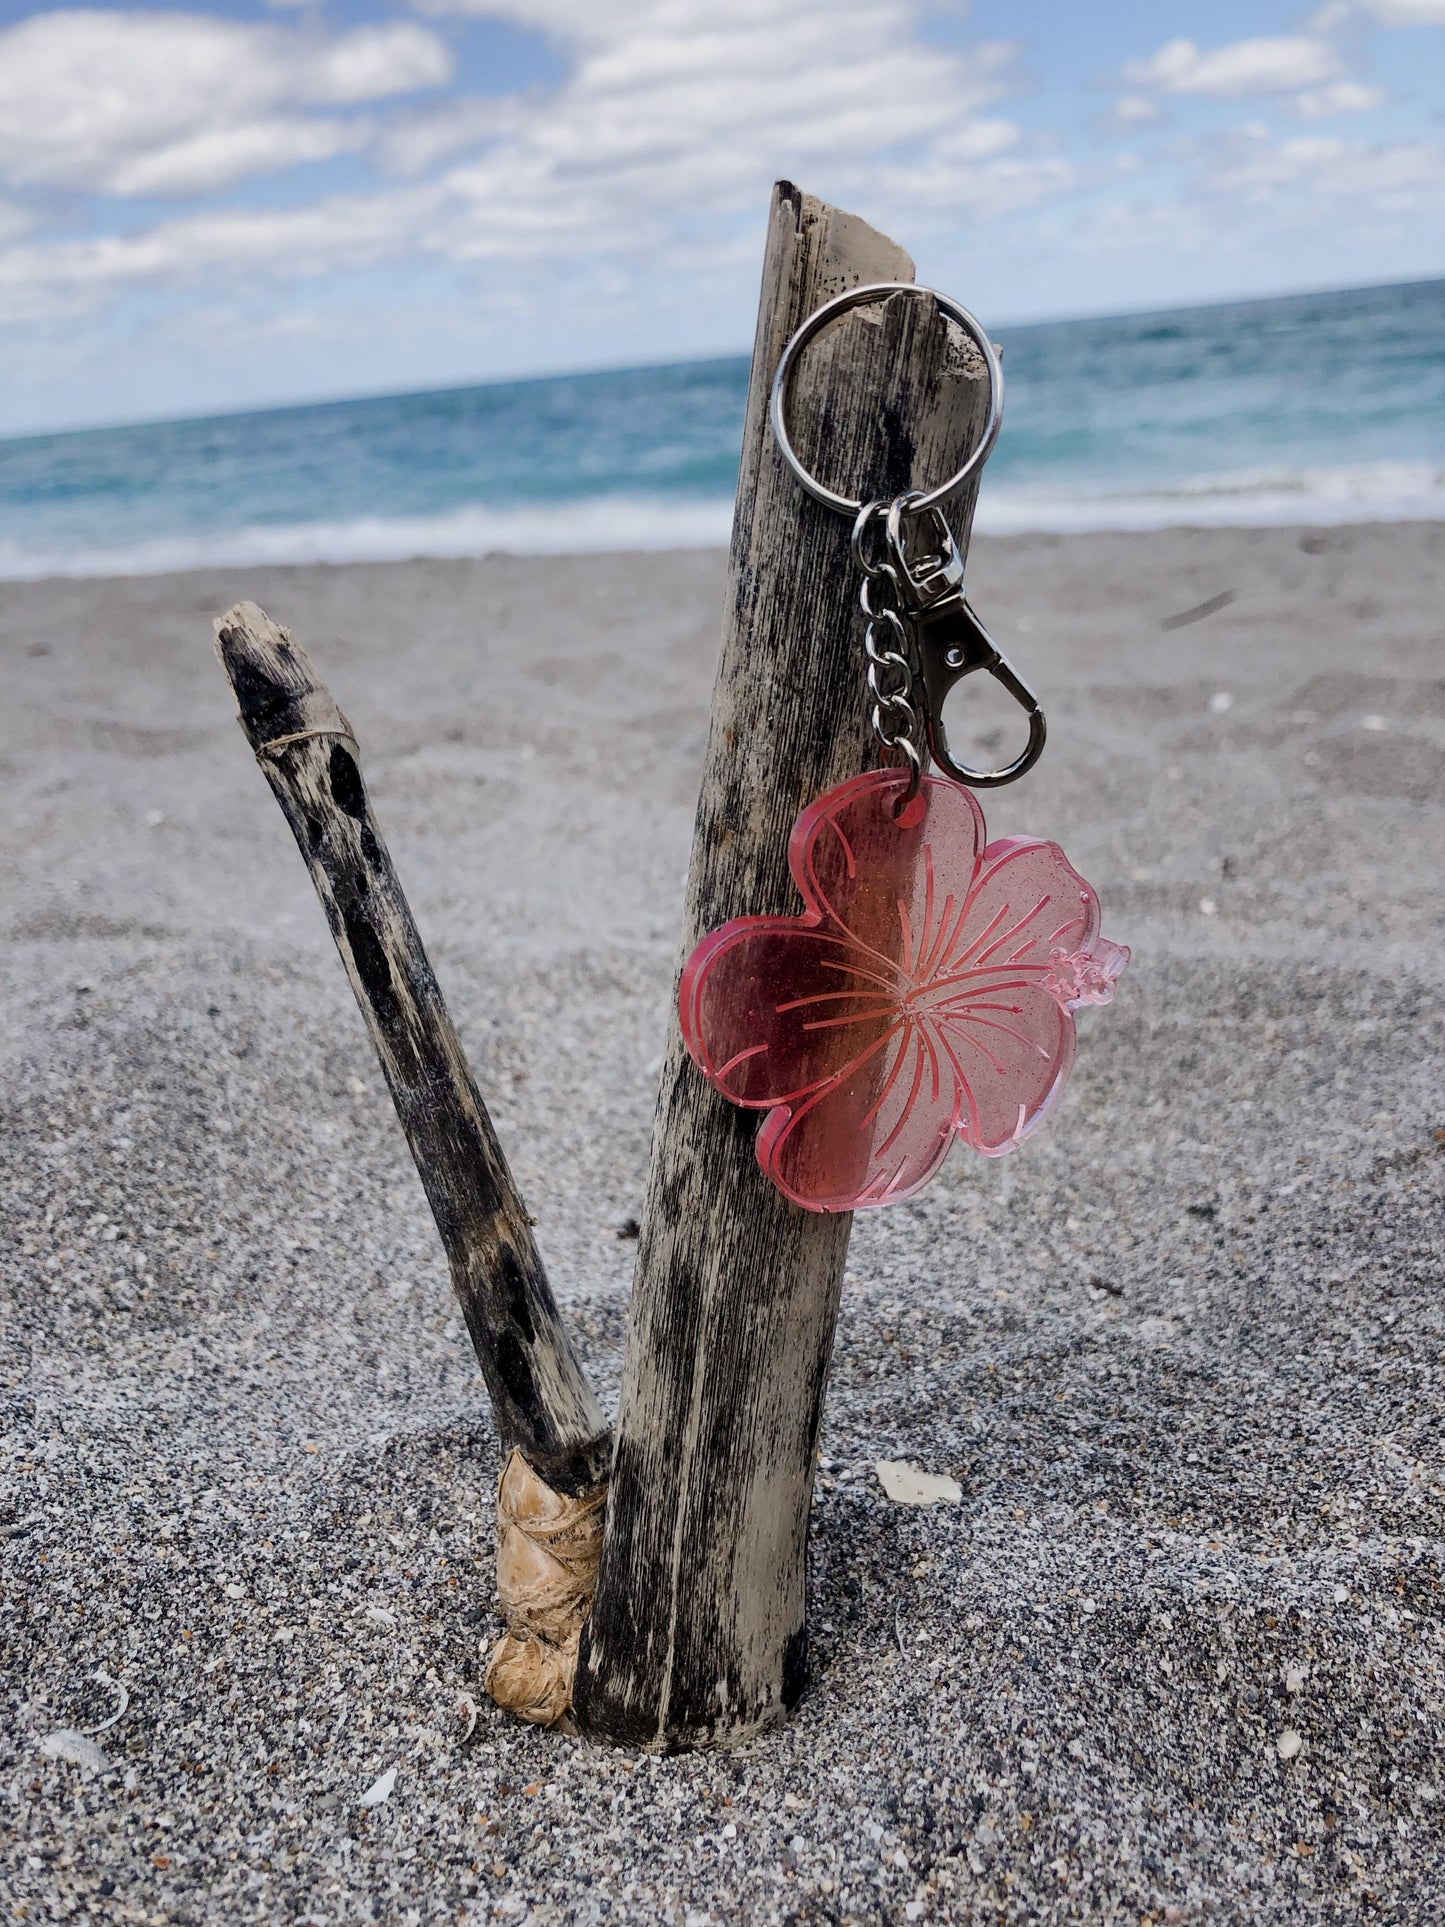 Hibiscus Flower Keychain with Snap Hook